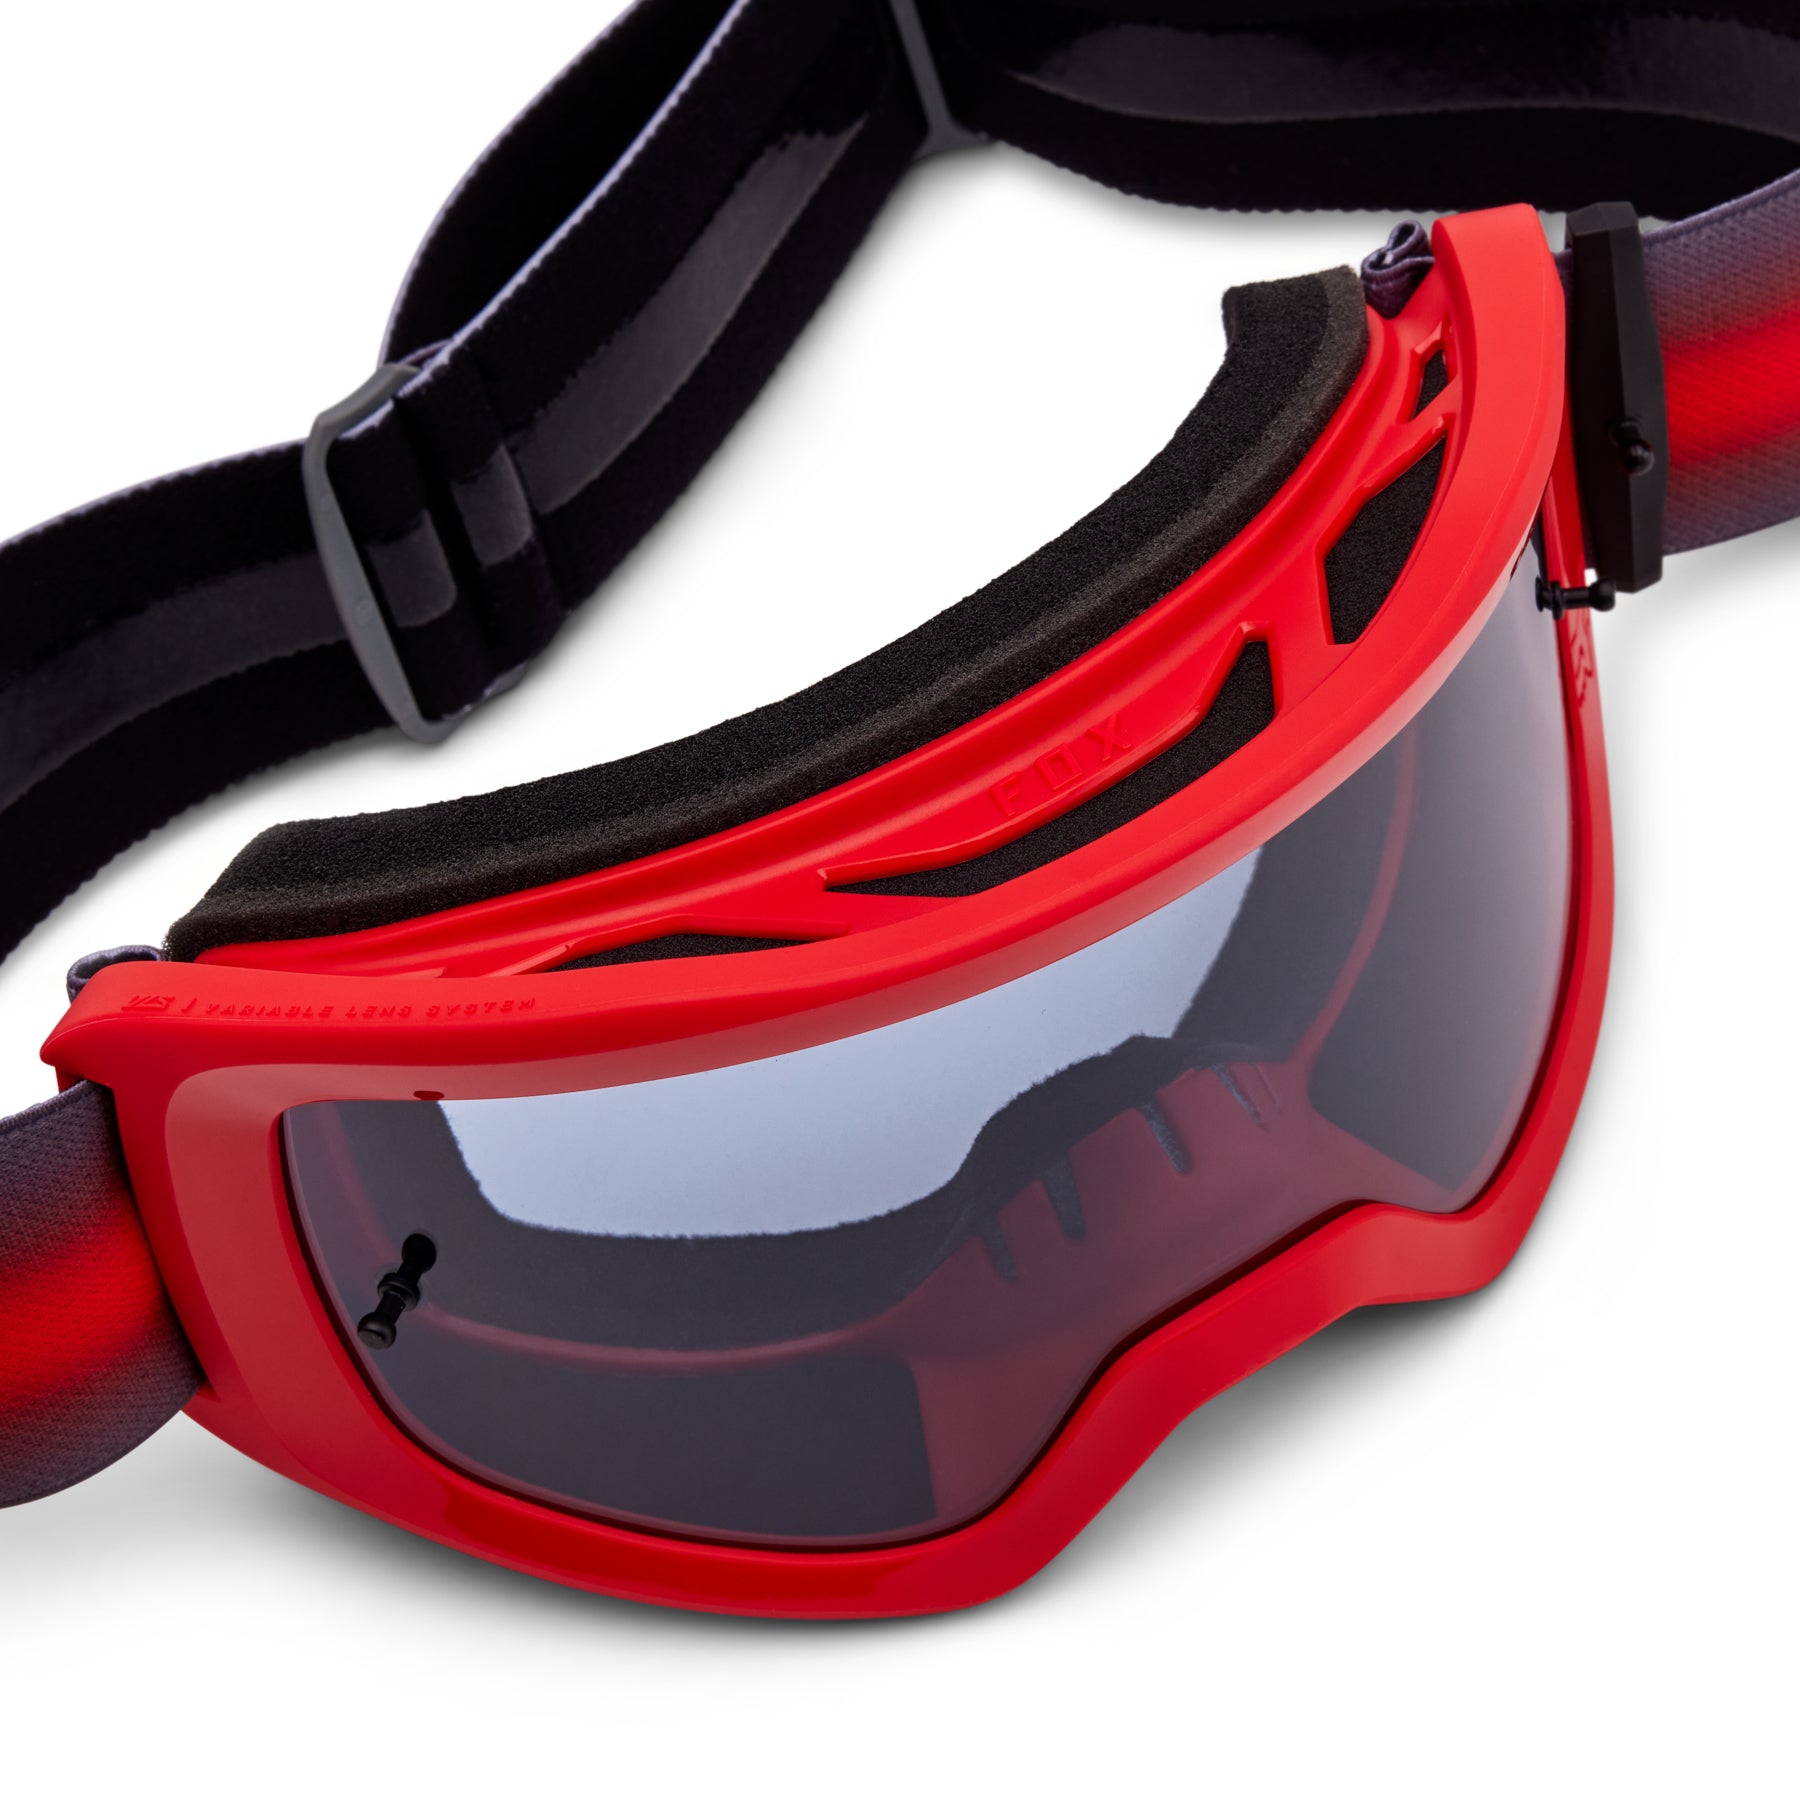 Fox Main Interfere Goggles - One Size Fits Most - Flo Red - Smoke Grey Lens - Image 3